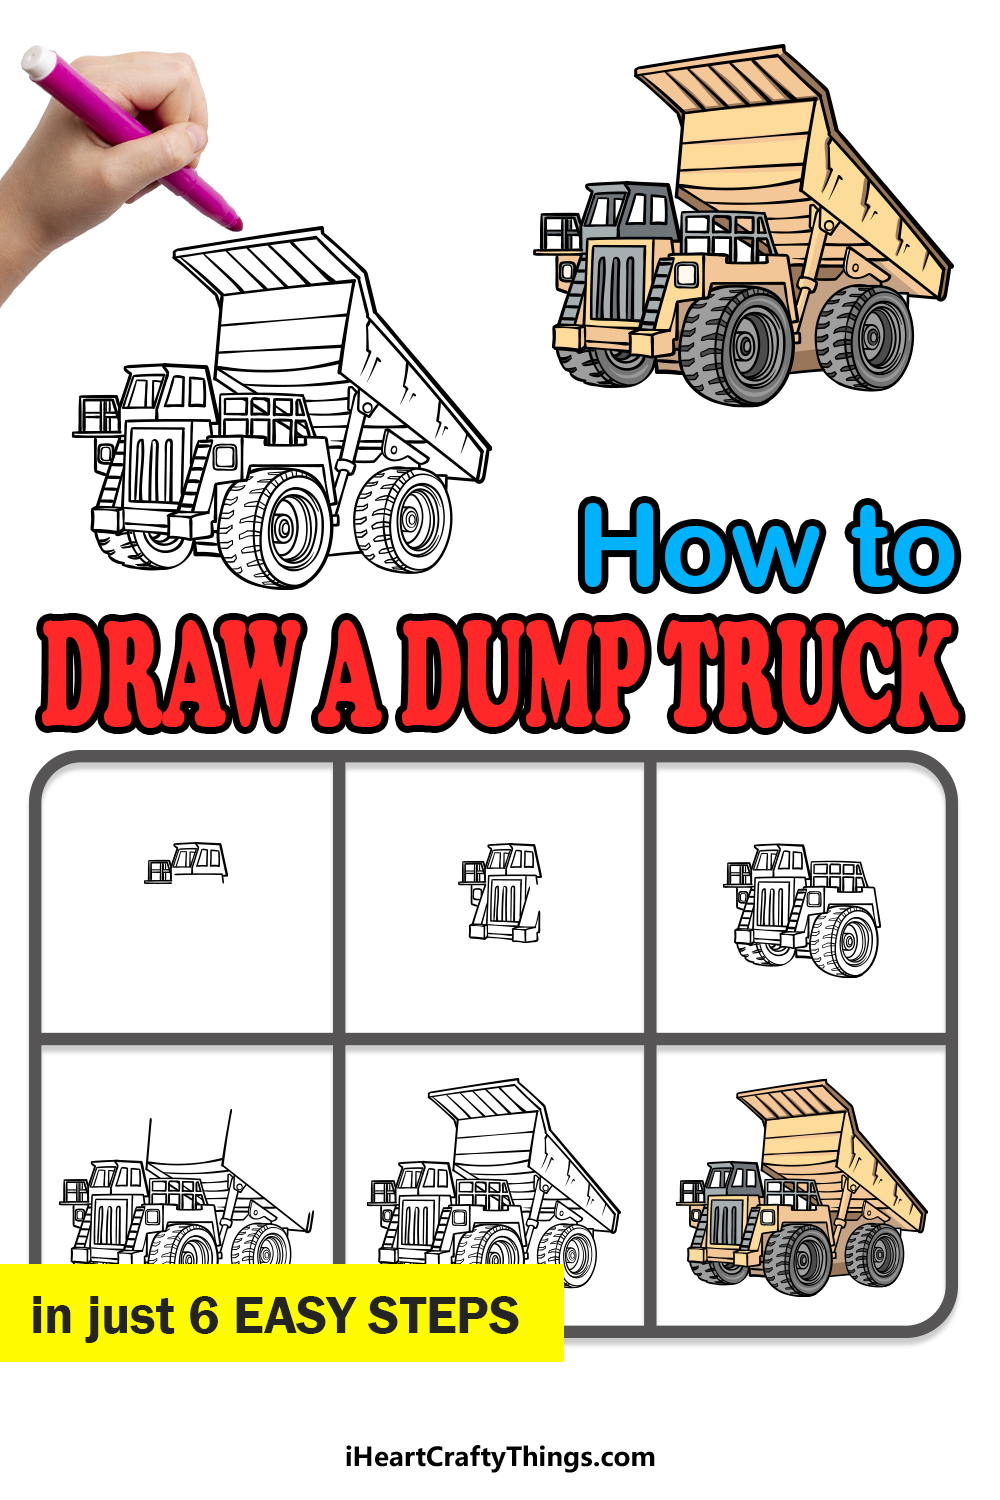 how to draw a Dump Truck in 6 easy steps